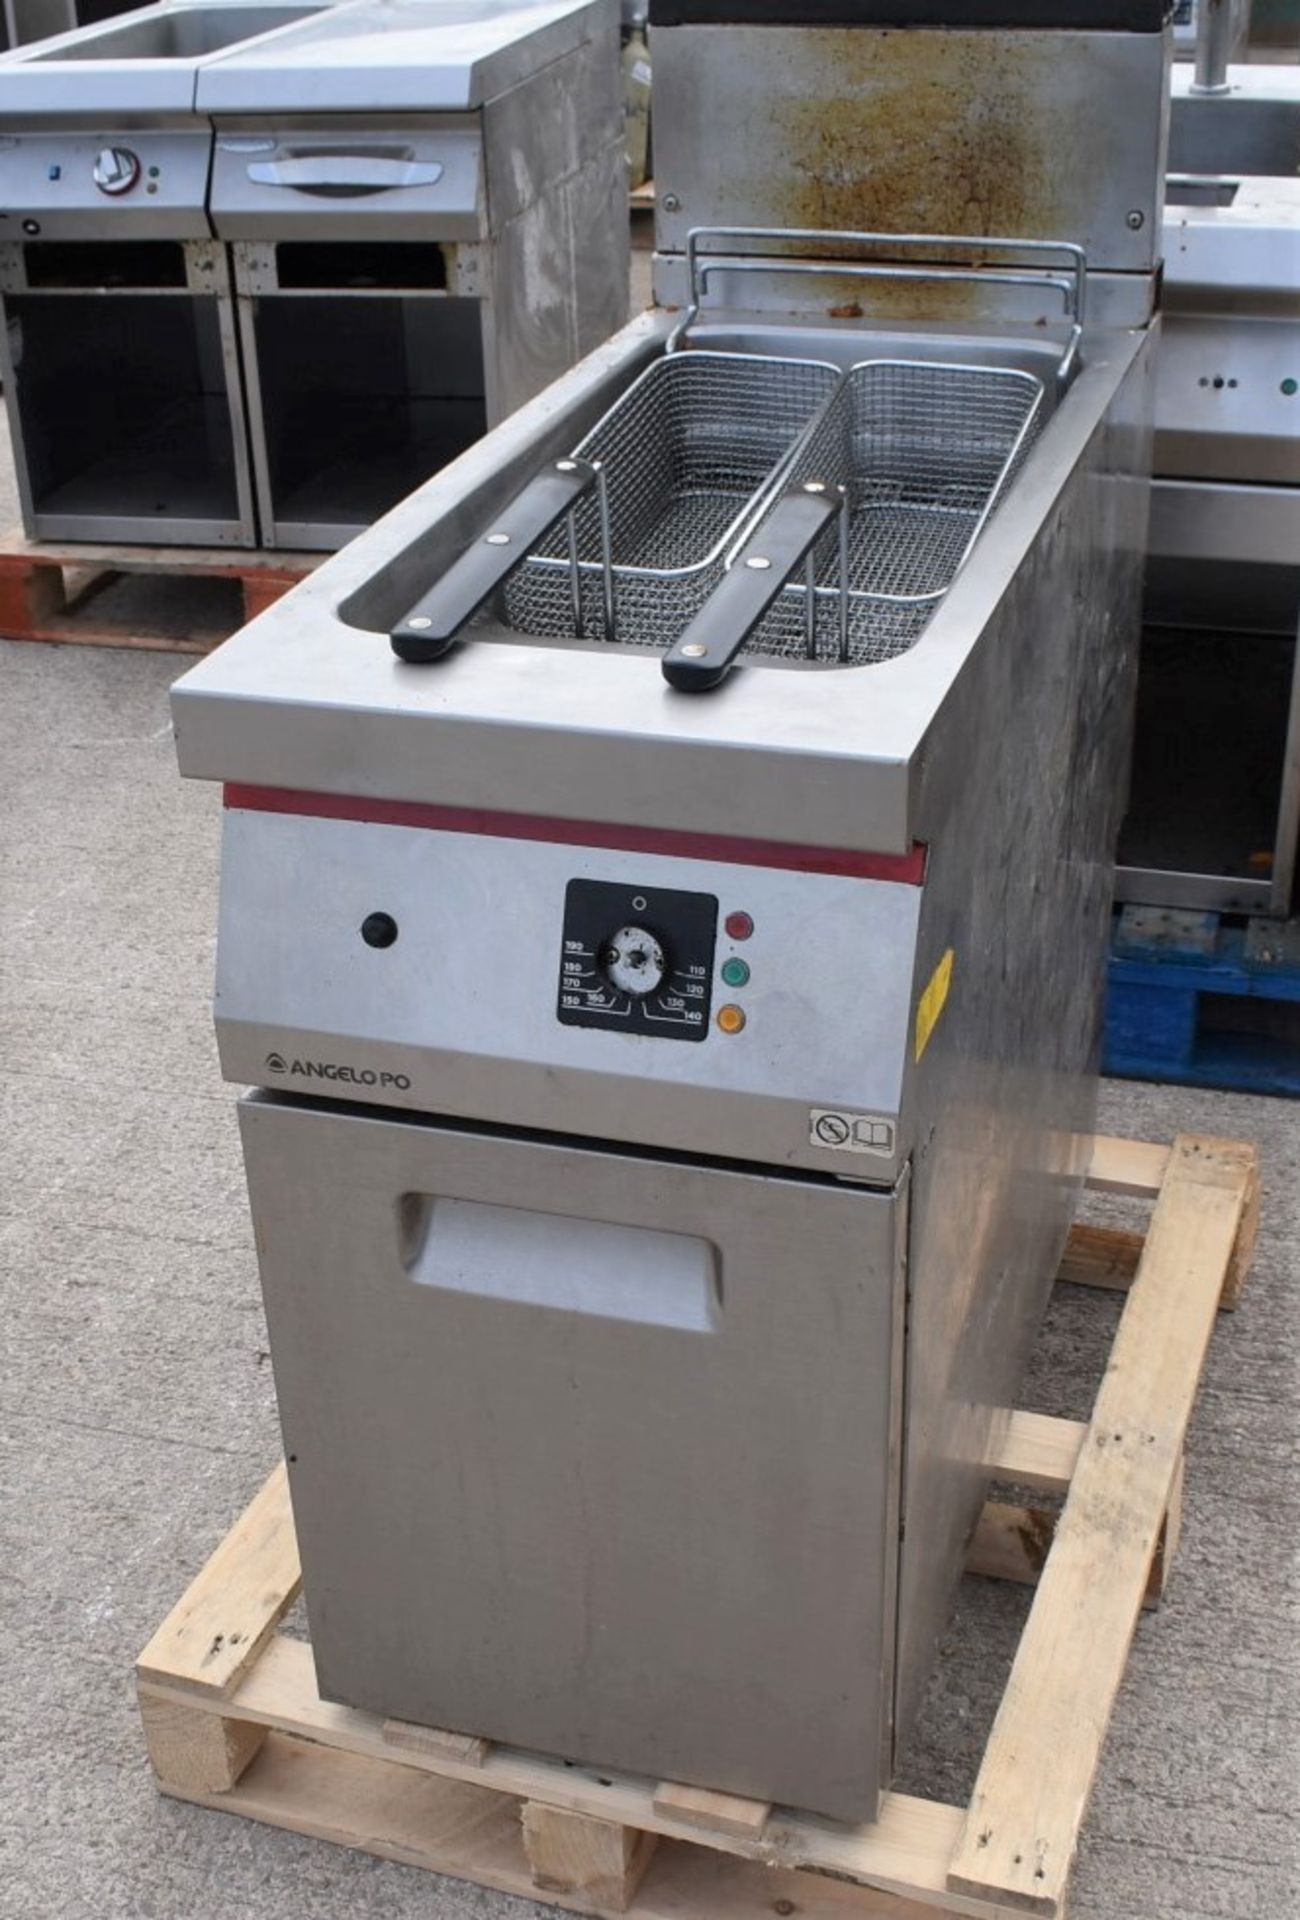 1 x Angelo Po Single Tank Gas Fryer With Baskets - AISI 304 Stainless Steel Finish - Latest Design